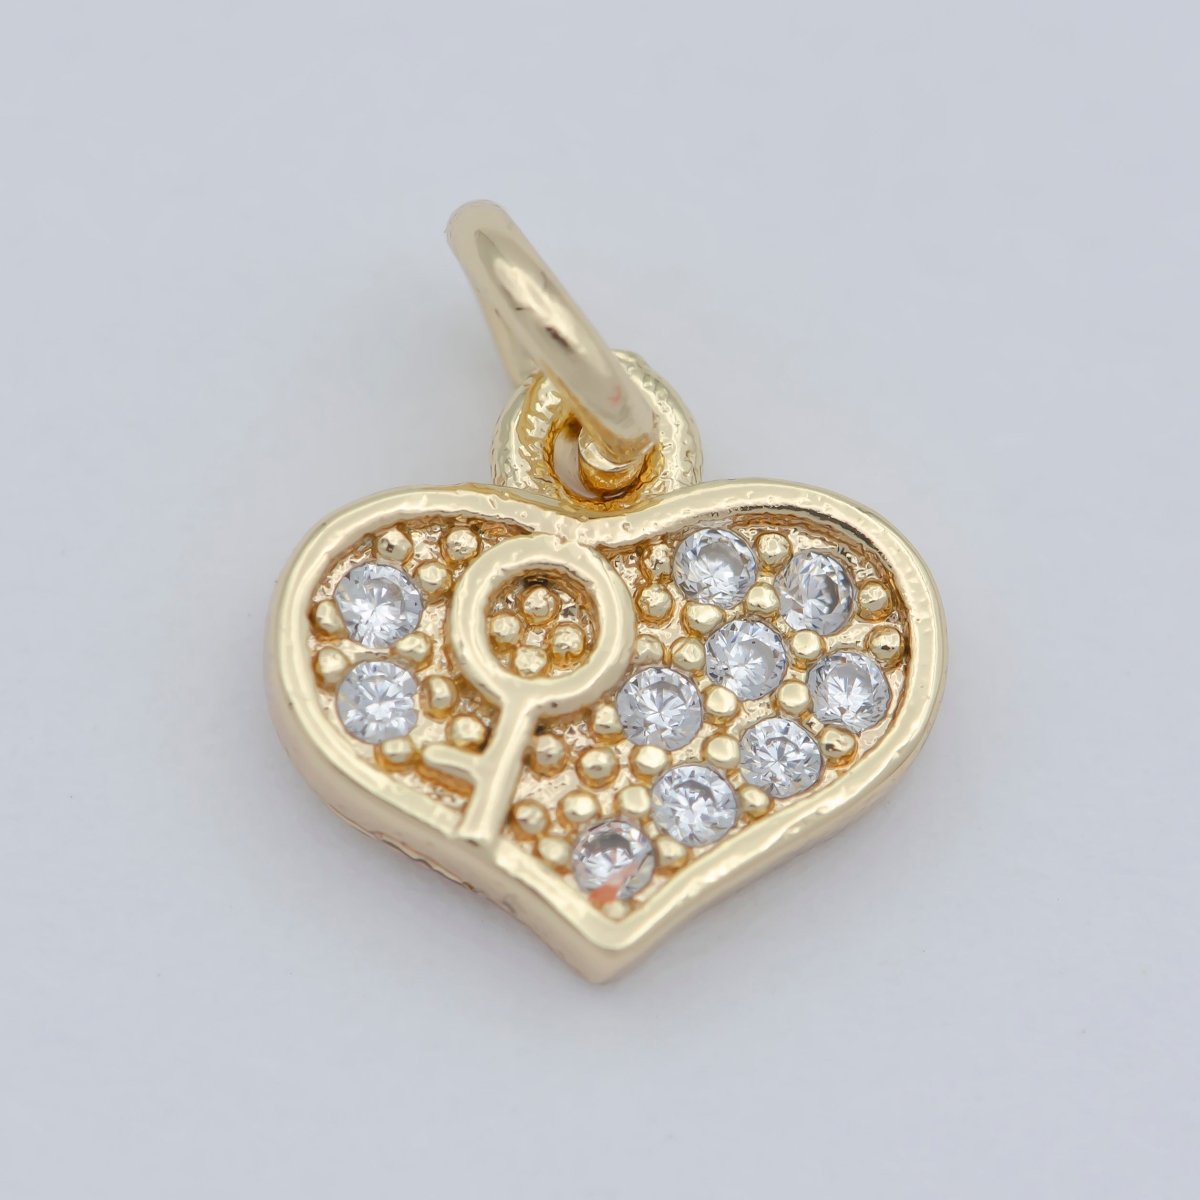 Tiny Gold Lock Key Pendant Charm, Dainty Heart charm for Bracelet Necklace Earring Component M-370 - DLUXCA